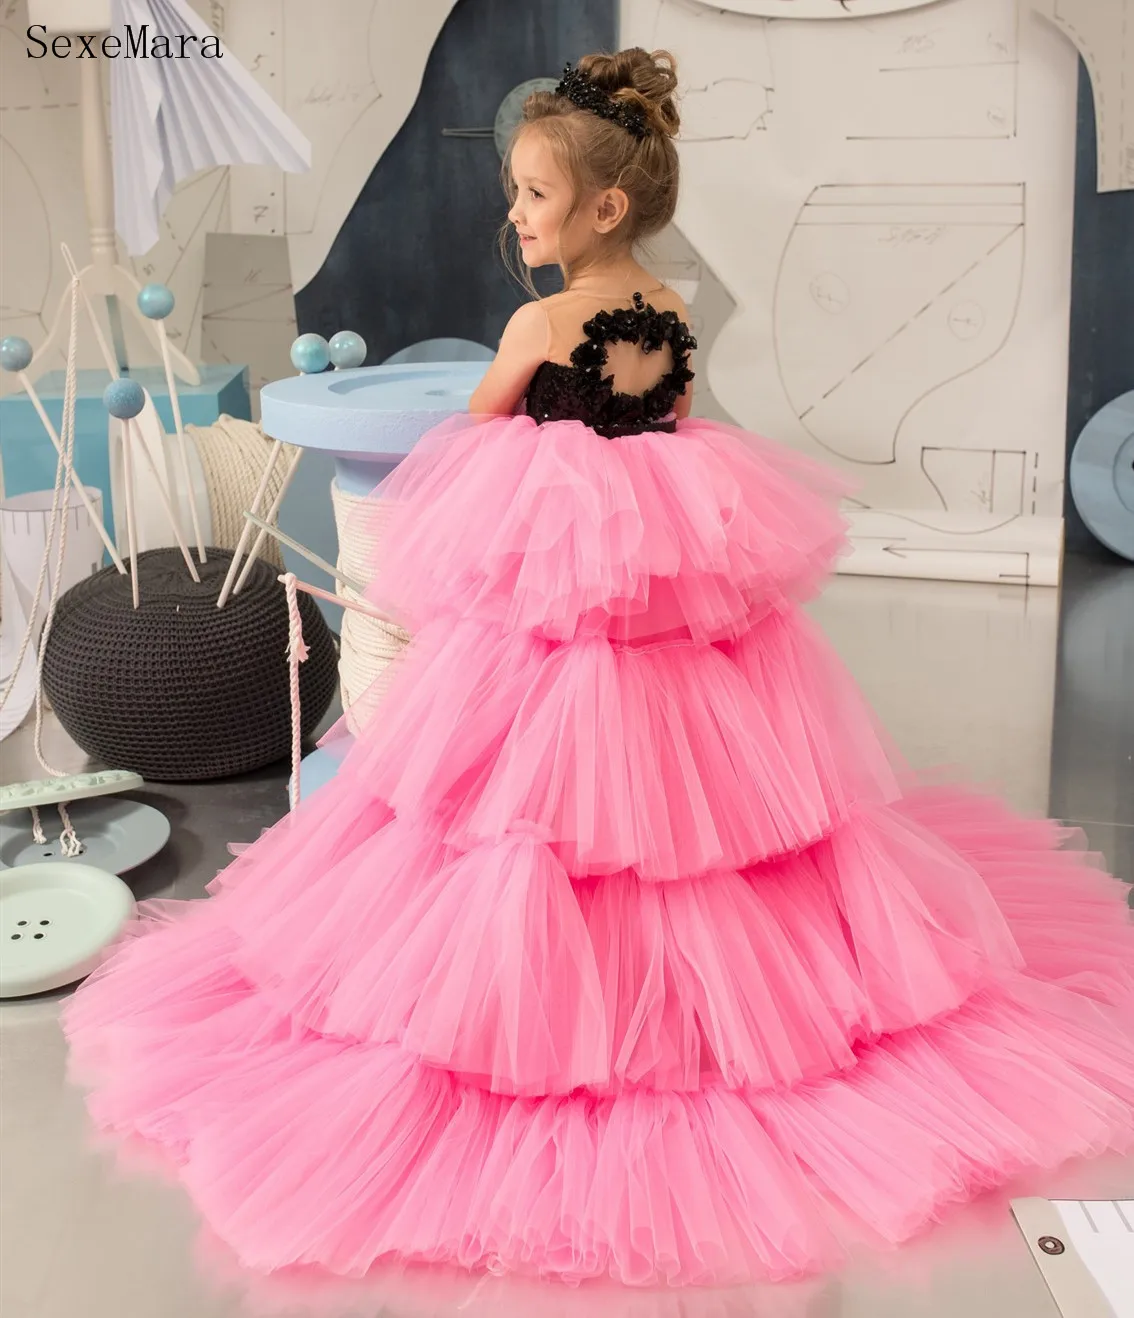 

New Puffy High-Low Style Flower Girl Dress Black Sequins Pink Tiered Skirt Sheer Neck Baby Girl Teens Birthday Dress Party Gown